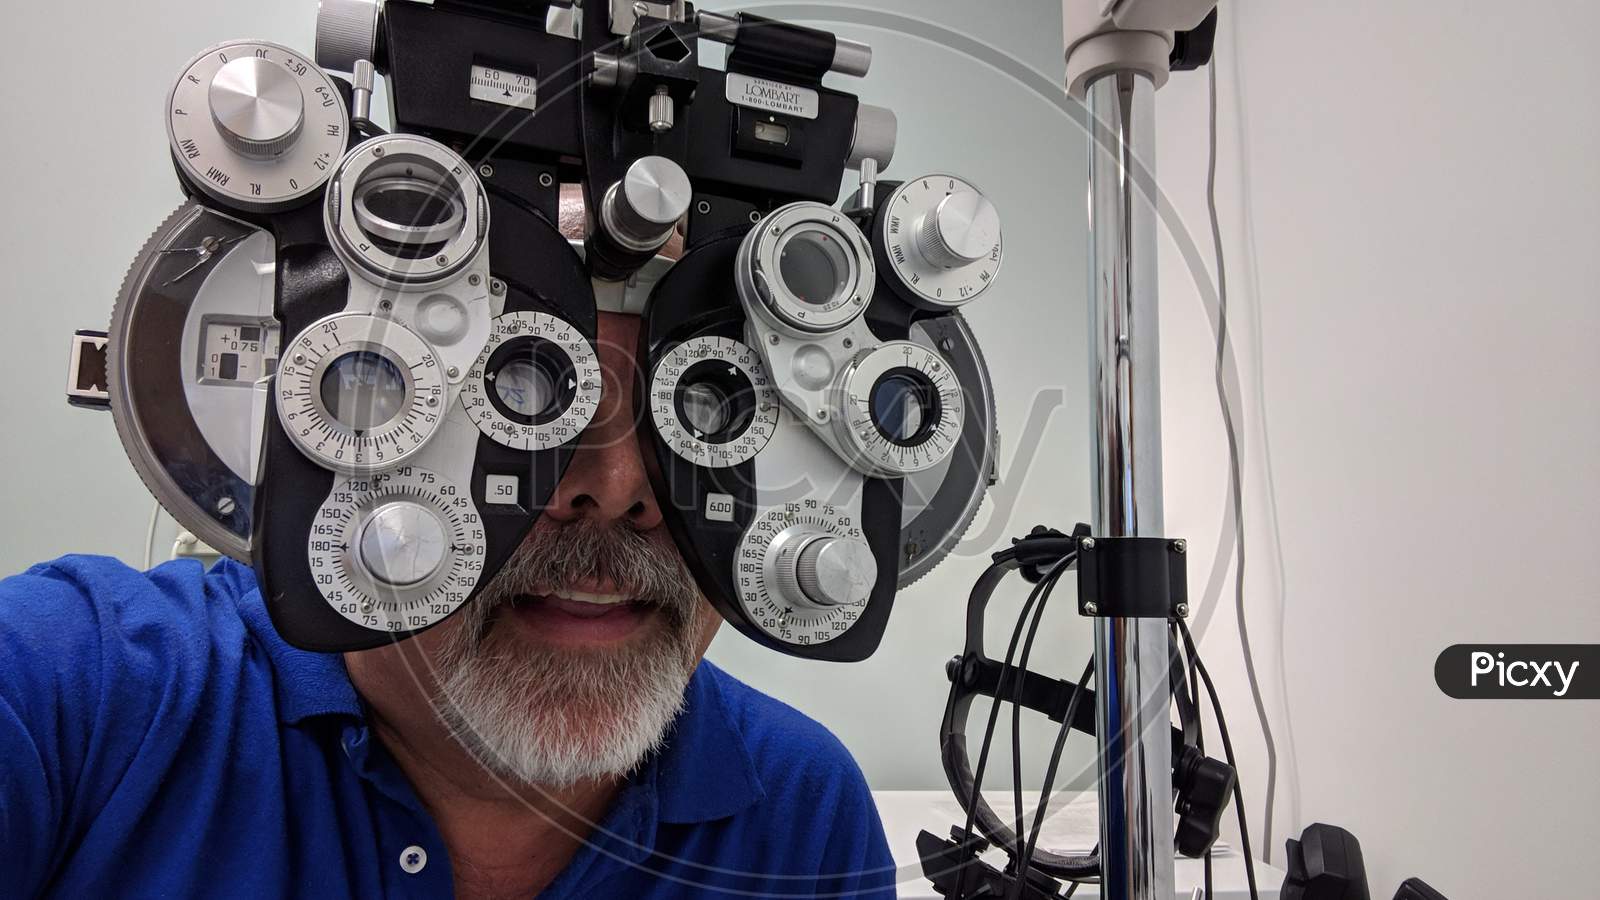 Man With Goatee Wearing Blue Shirt Gets Eye Exam With Diopter Machine